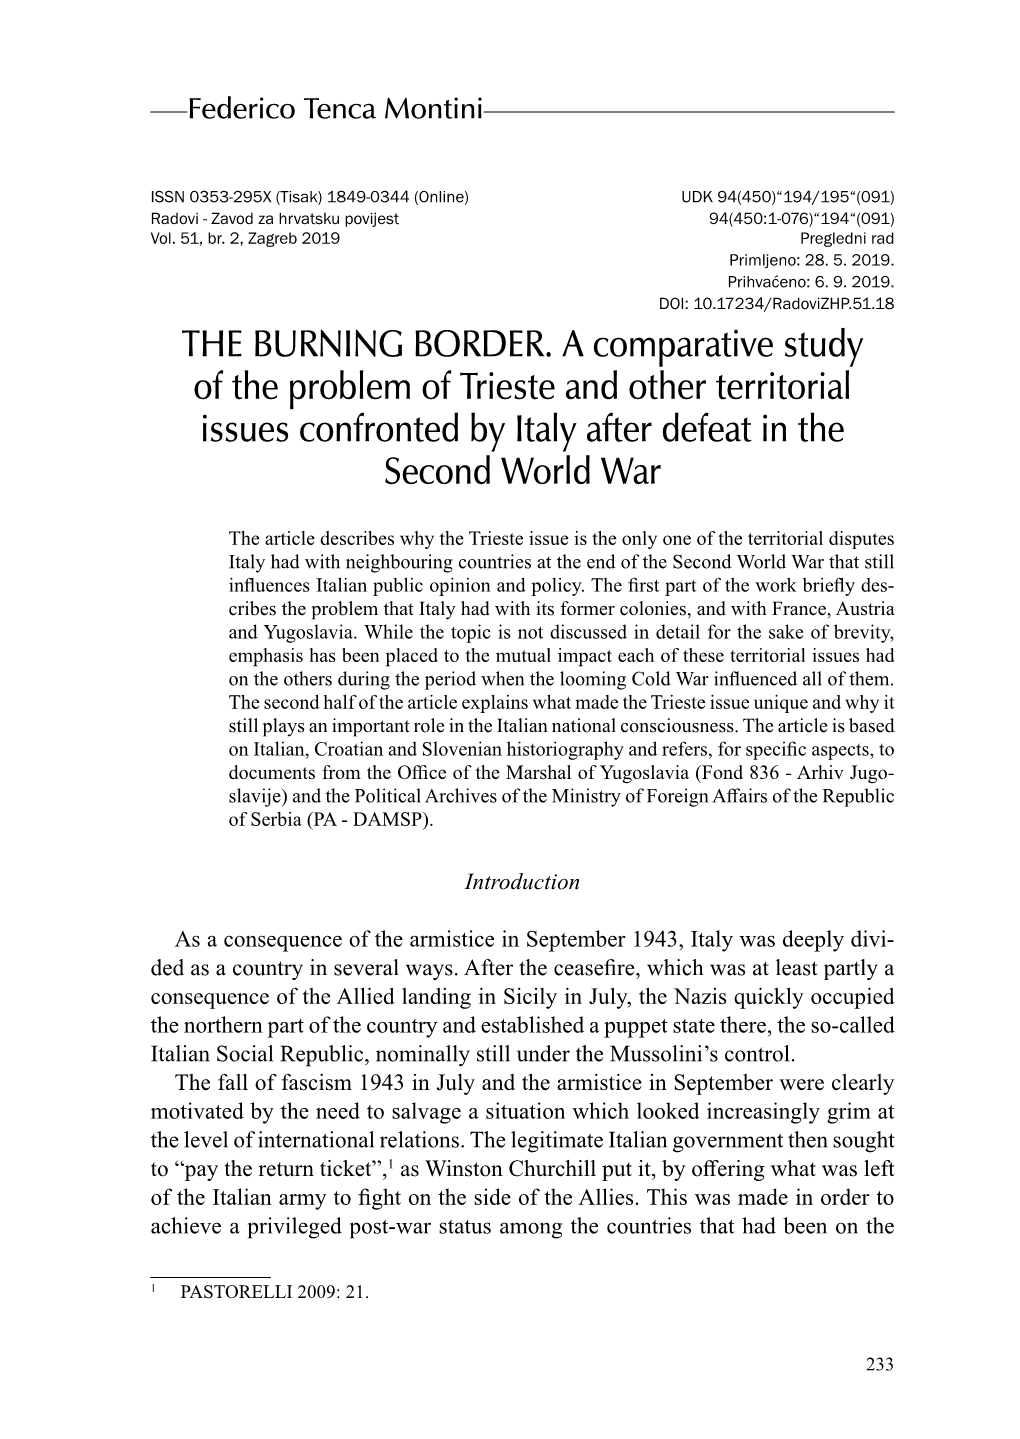 THE BURNING BORDER. a Comparative Study of the Problem of Trieste and Other Territorial Issues Confronted by Italy After Defeat in the Second World War